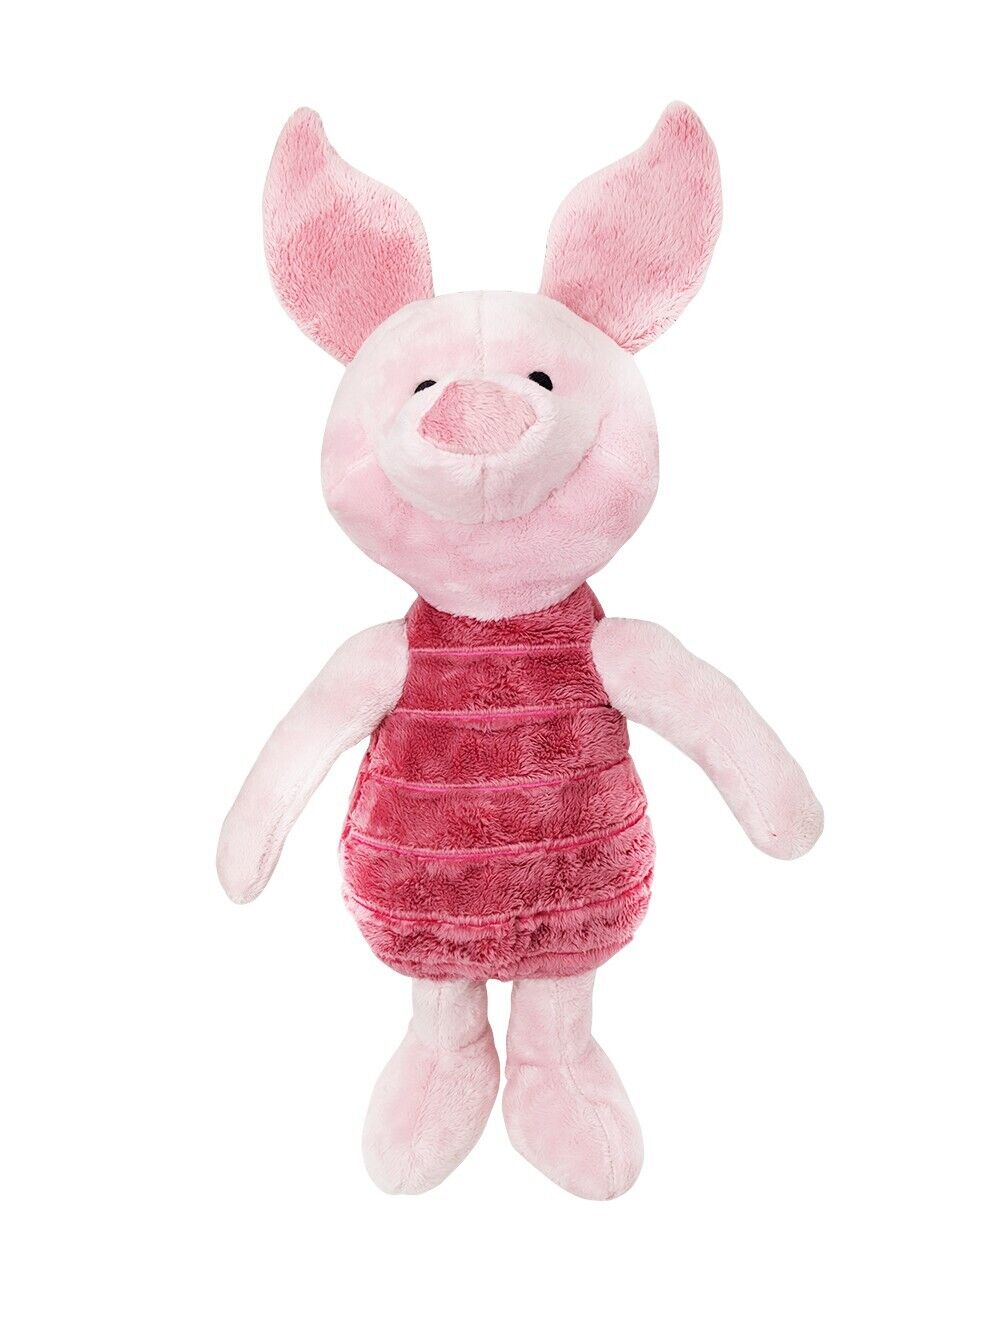 New Disney Store Piglet Plush Toy From Winnie The Pooh - 17 inch